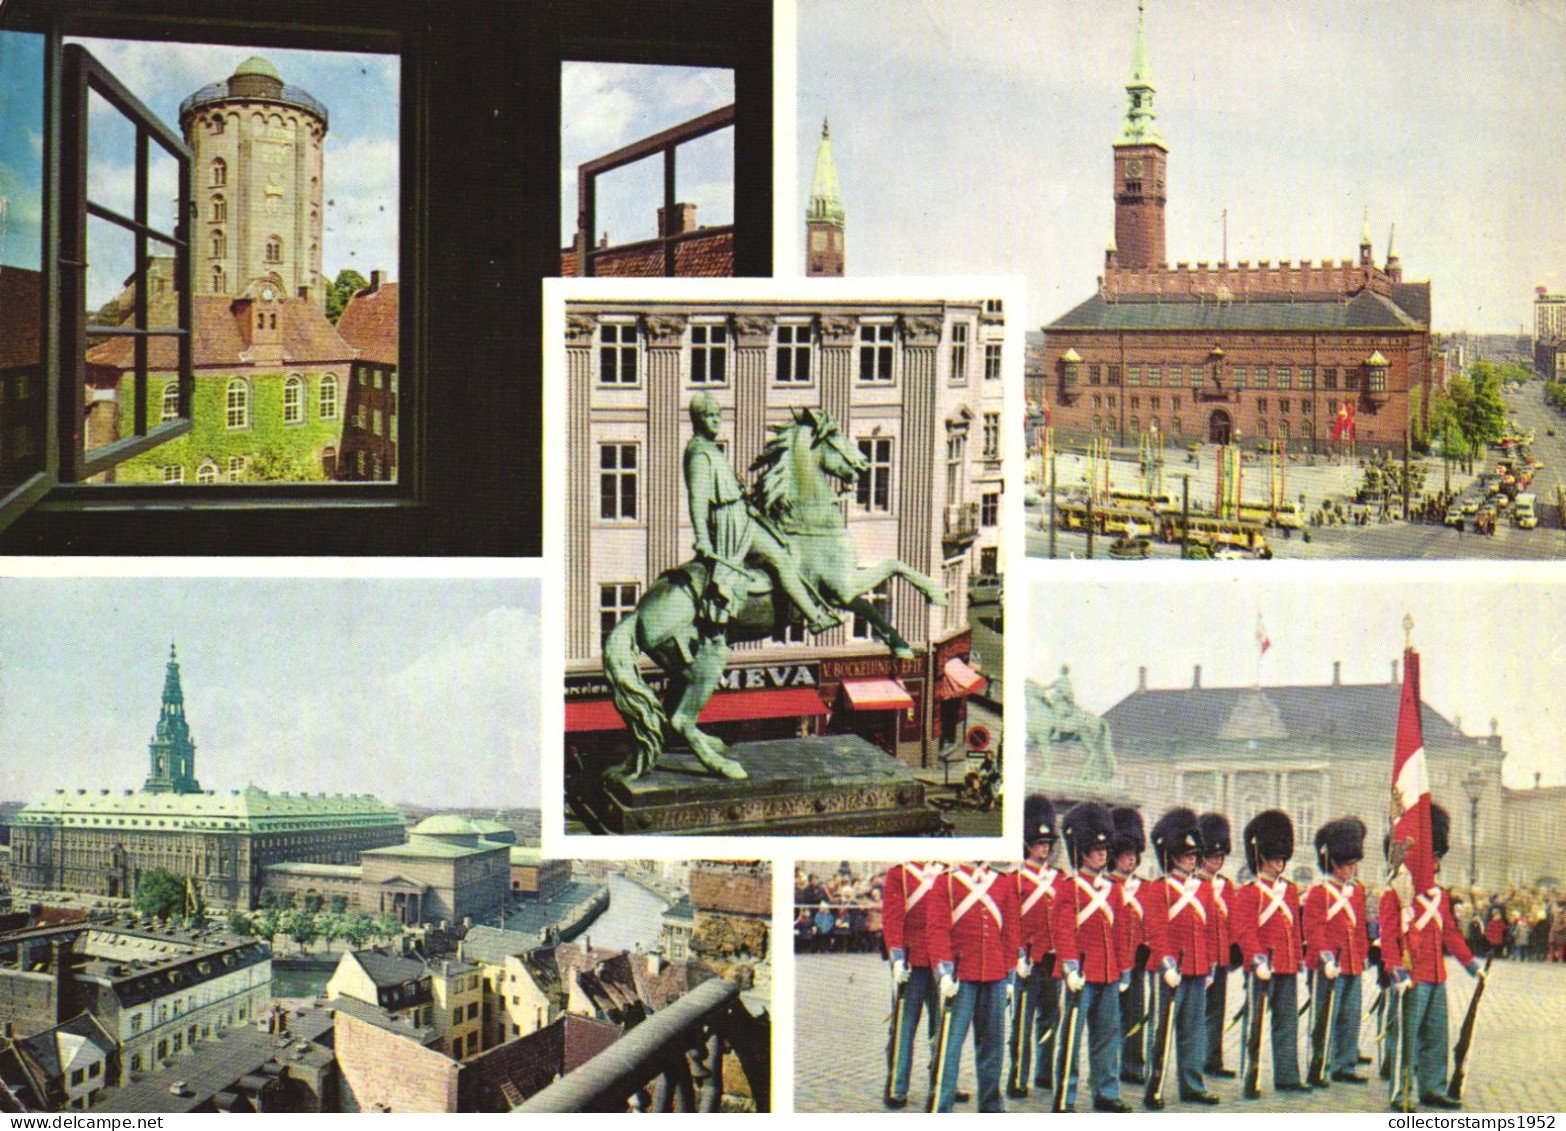 MULTIPLE VIEWS, ARCHITECTURE, TOWN HALL, ROUND TOWER, STATUE, HORSE, CARS, GUARDS, FLAG, CHRISTIANSBORG,DENMARK,POSTCARD - Danemark